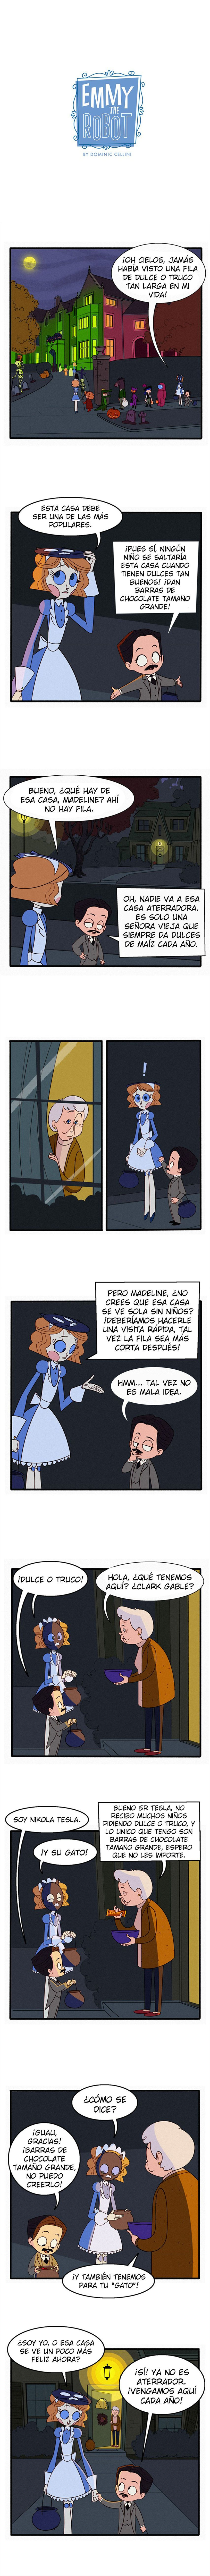 Emmy The Robot [Spanish] (Ongoing 28